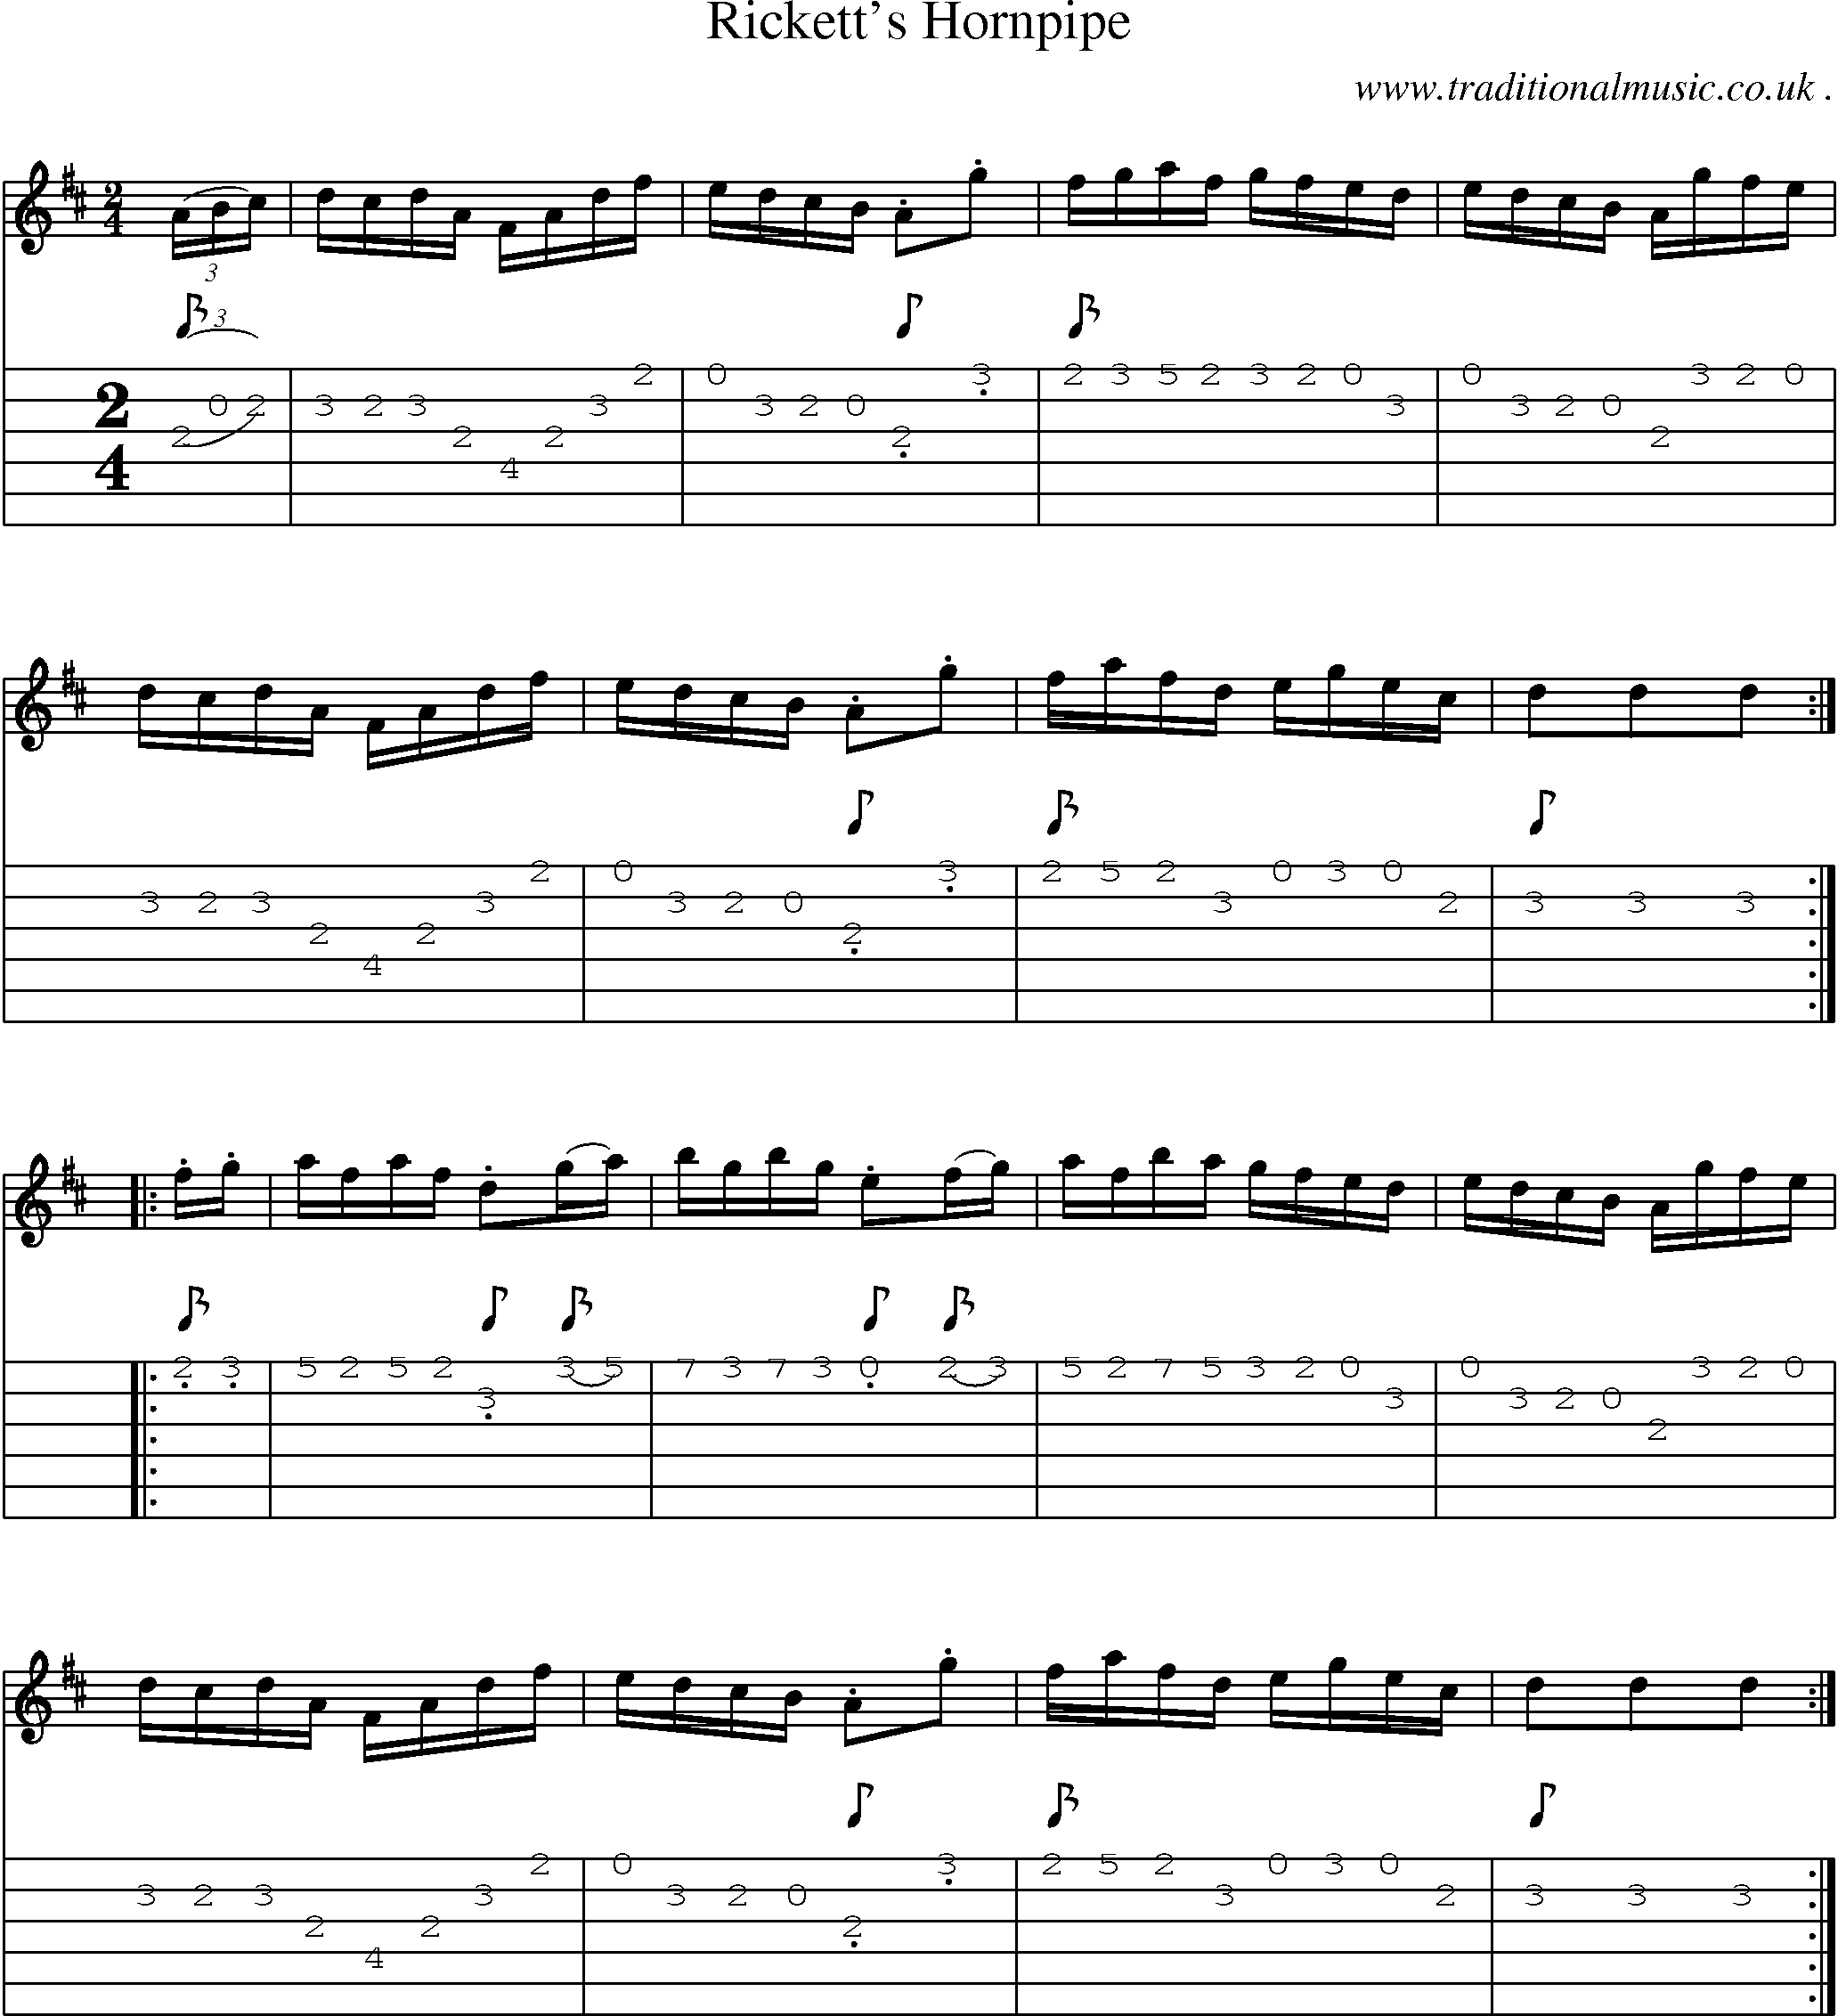 Sheet-Music and Guitar Tabs for Ricketts Hornpipe